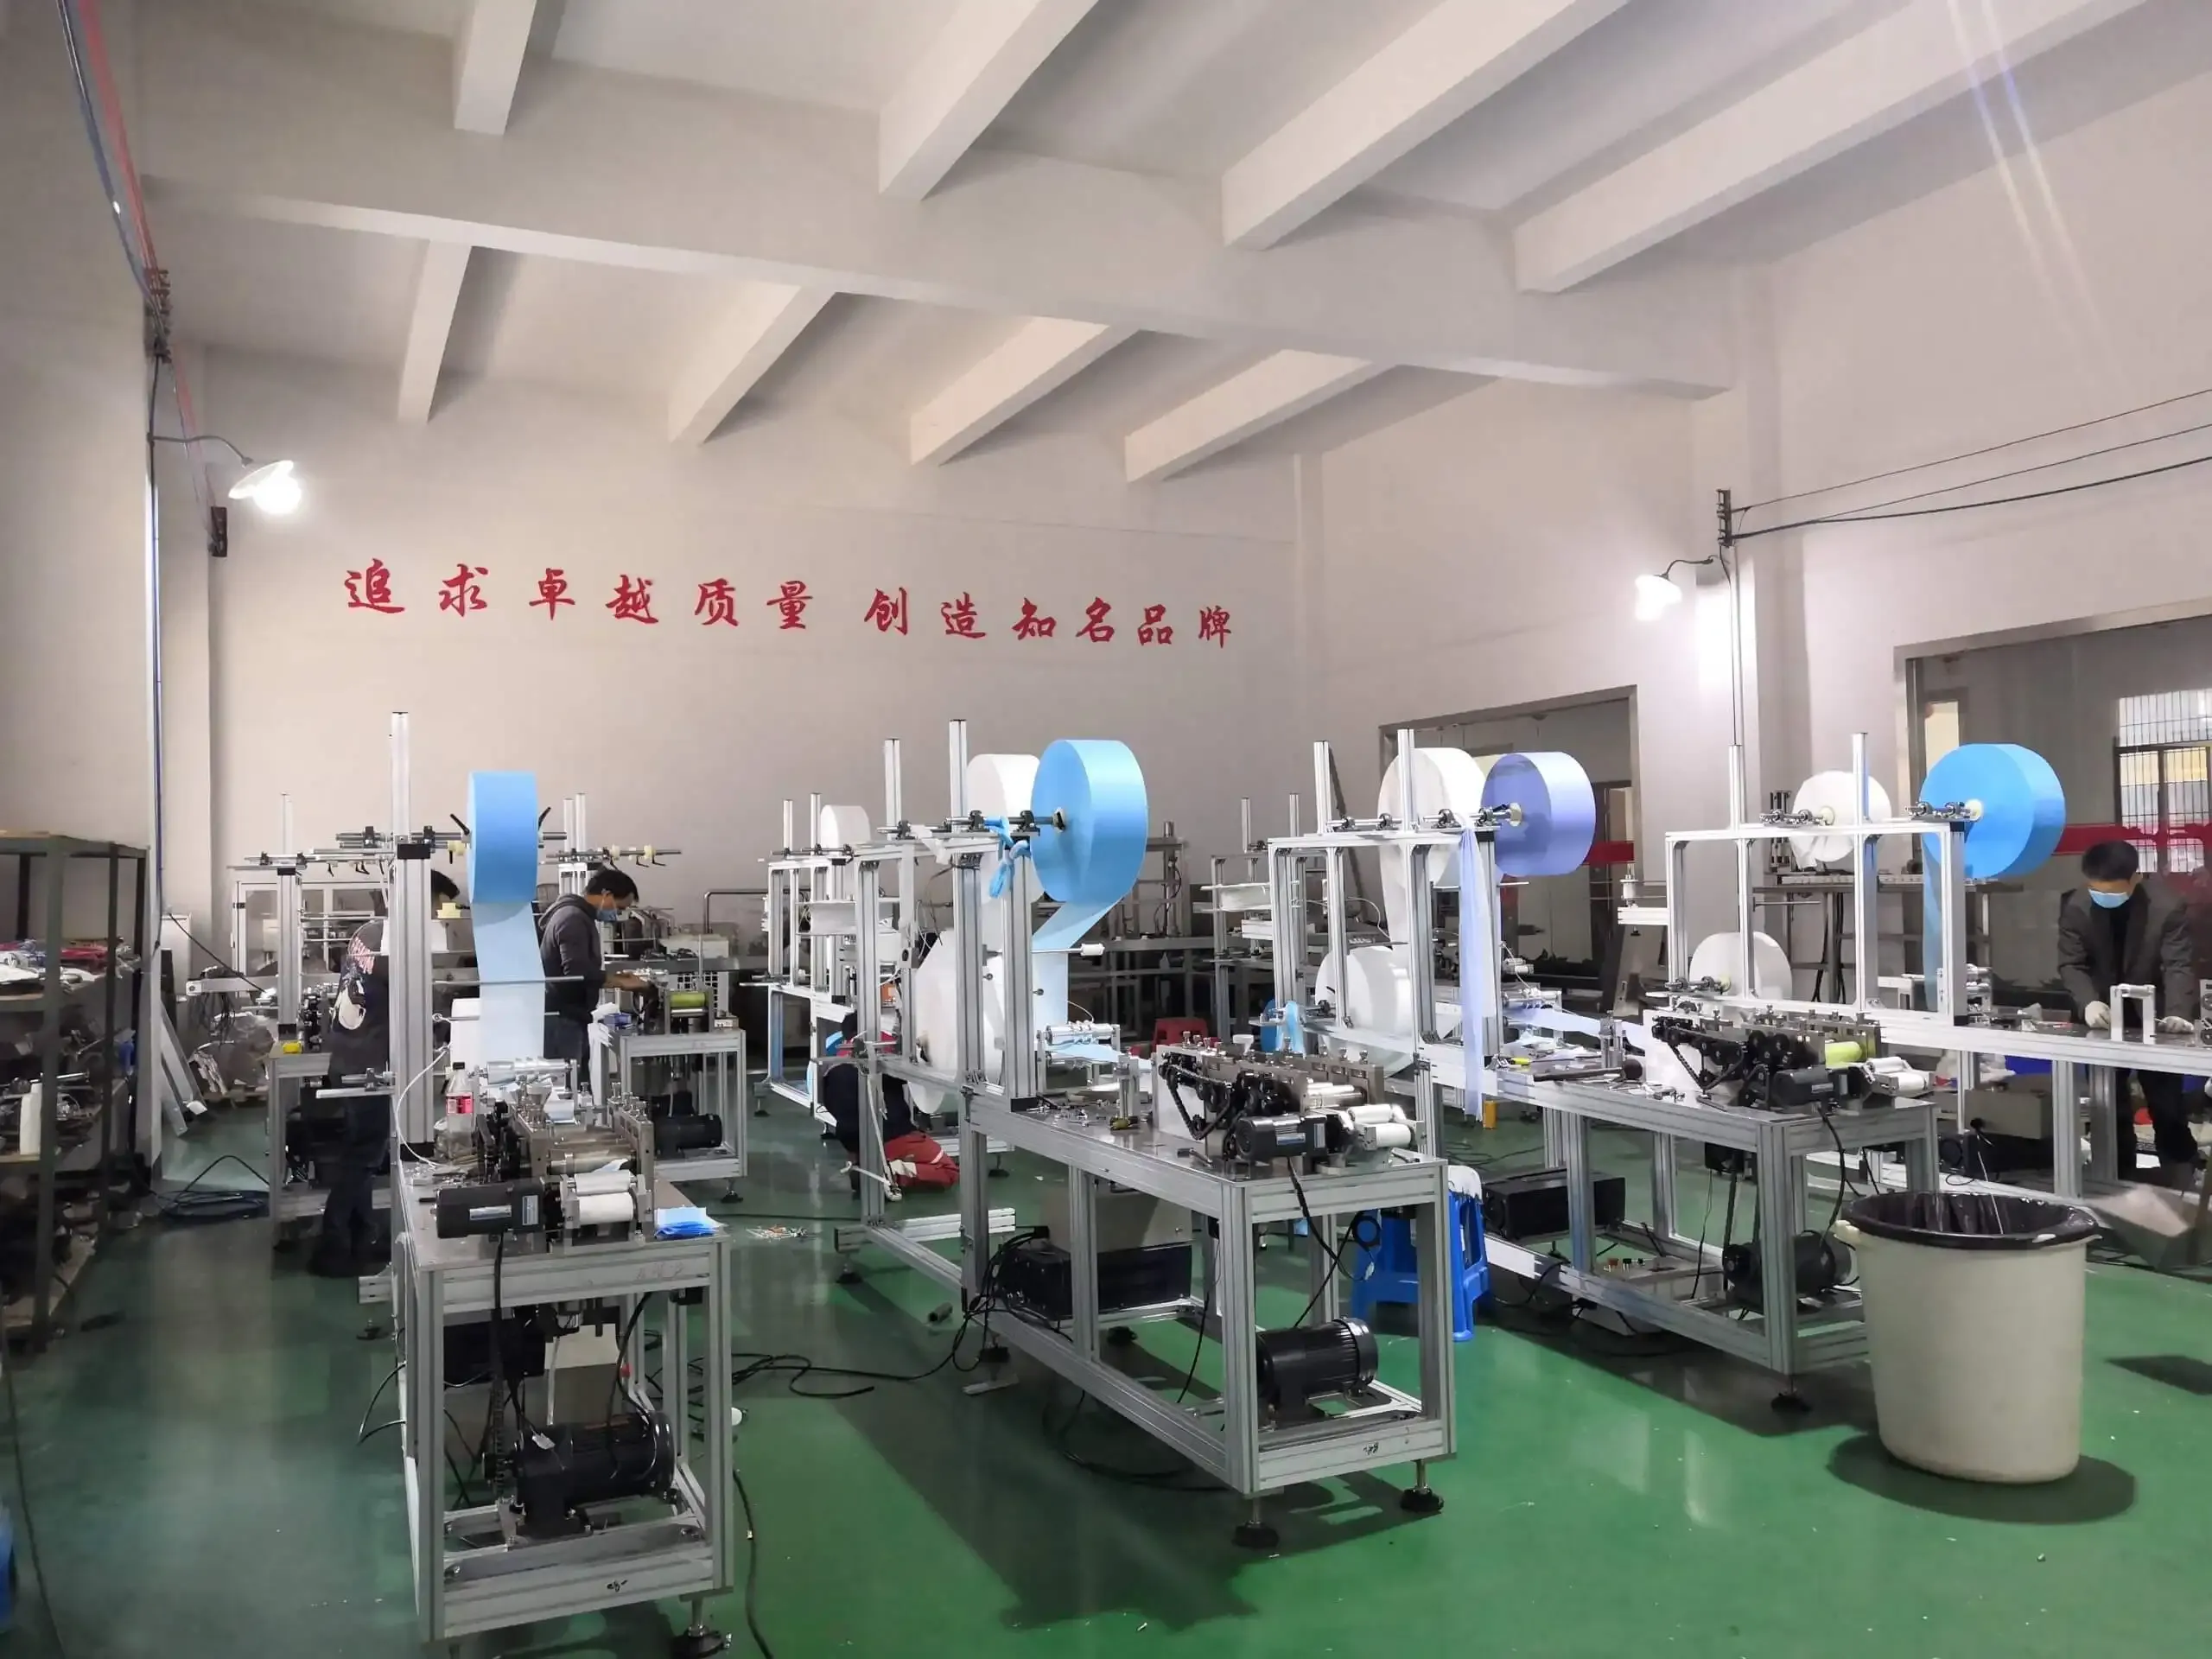 Manufacturing Semi-auto Mask Machine with Factory Price